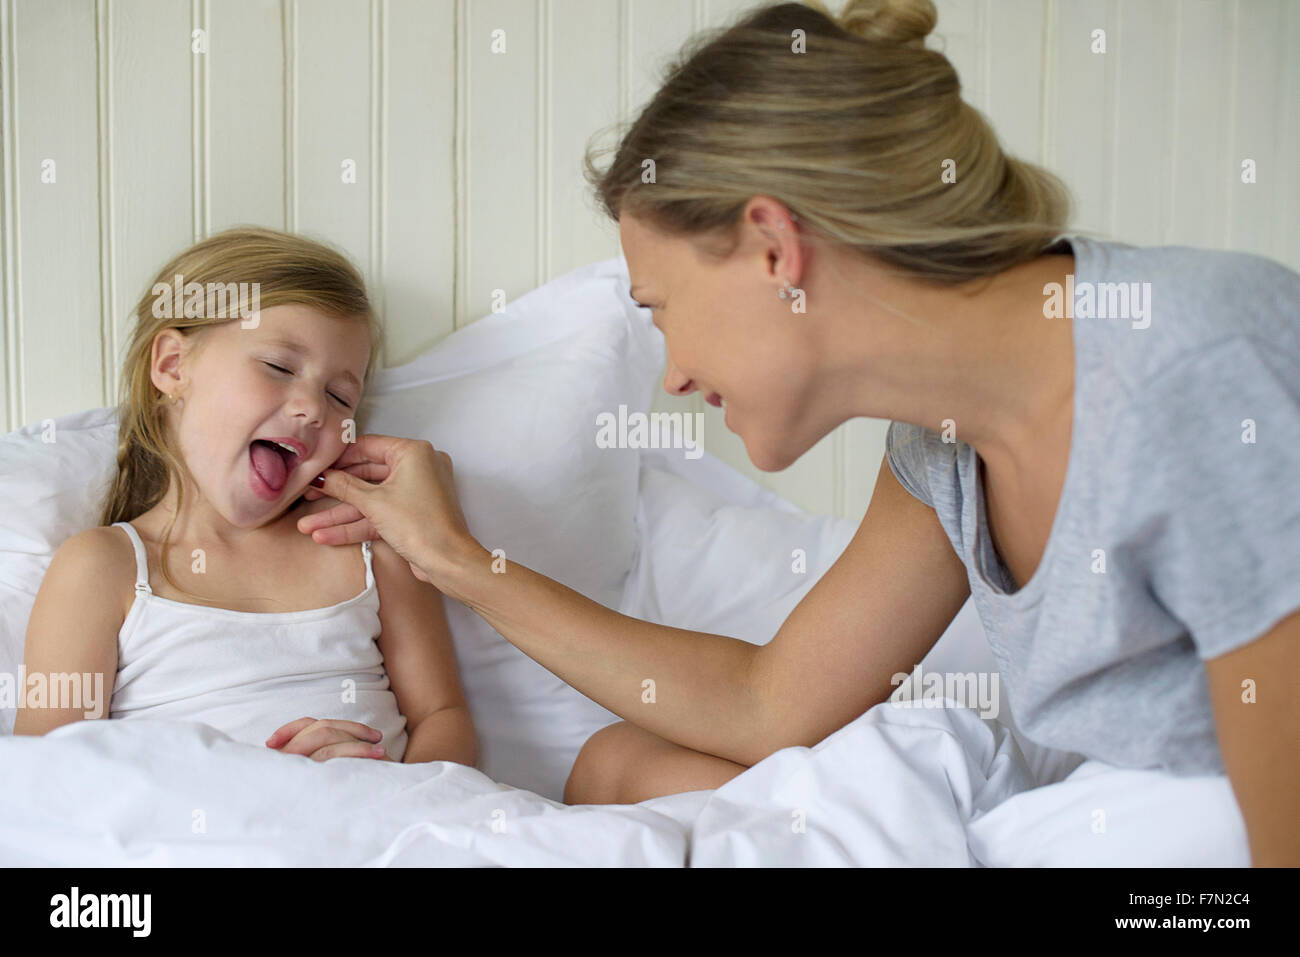 Mother and daughter bonding Stock Photo